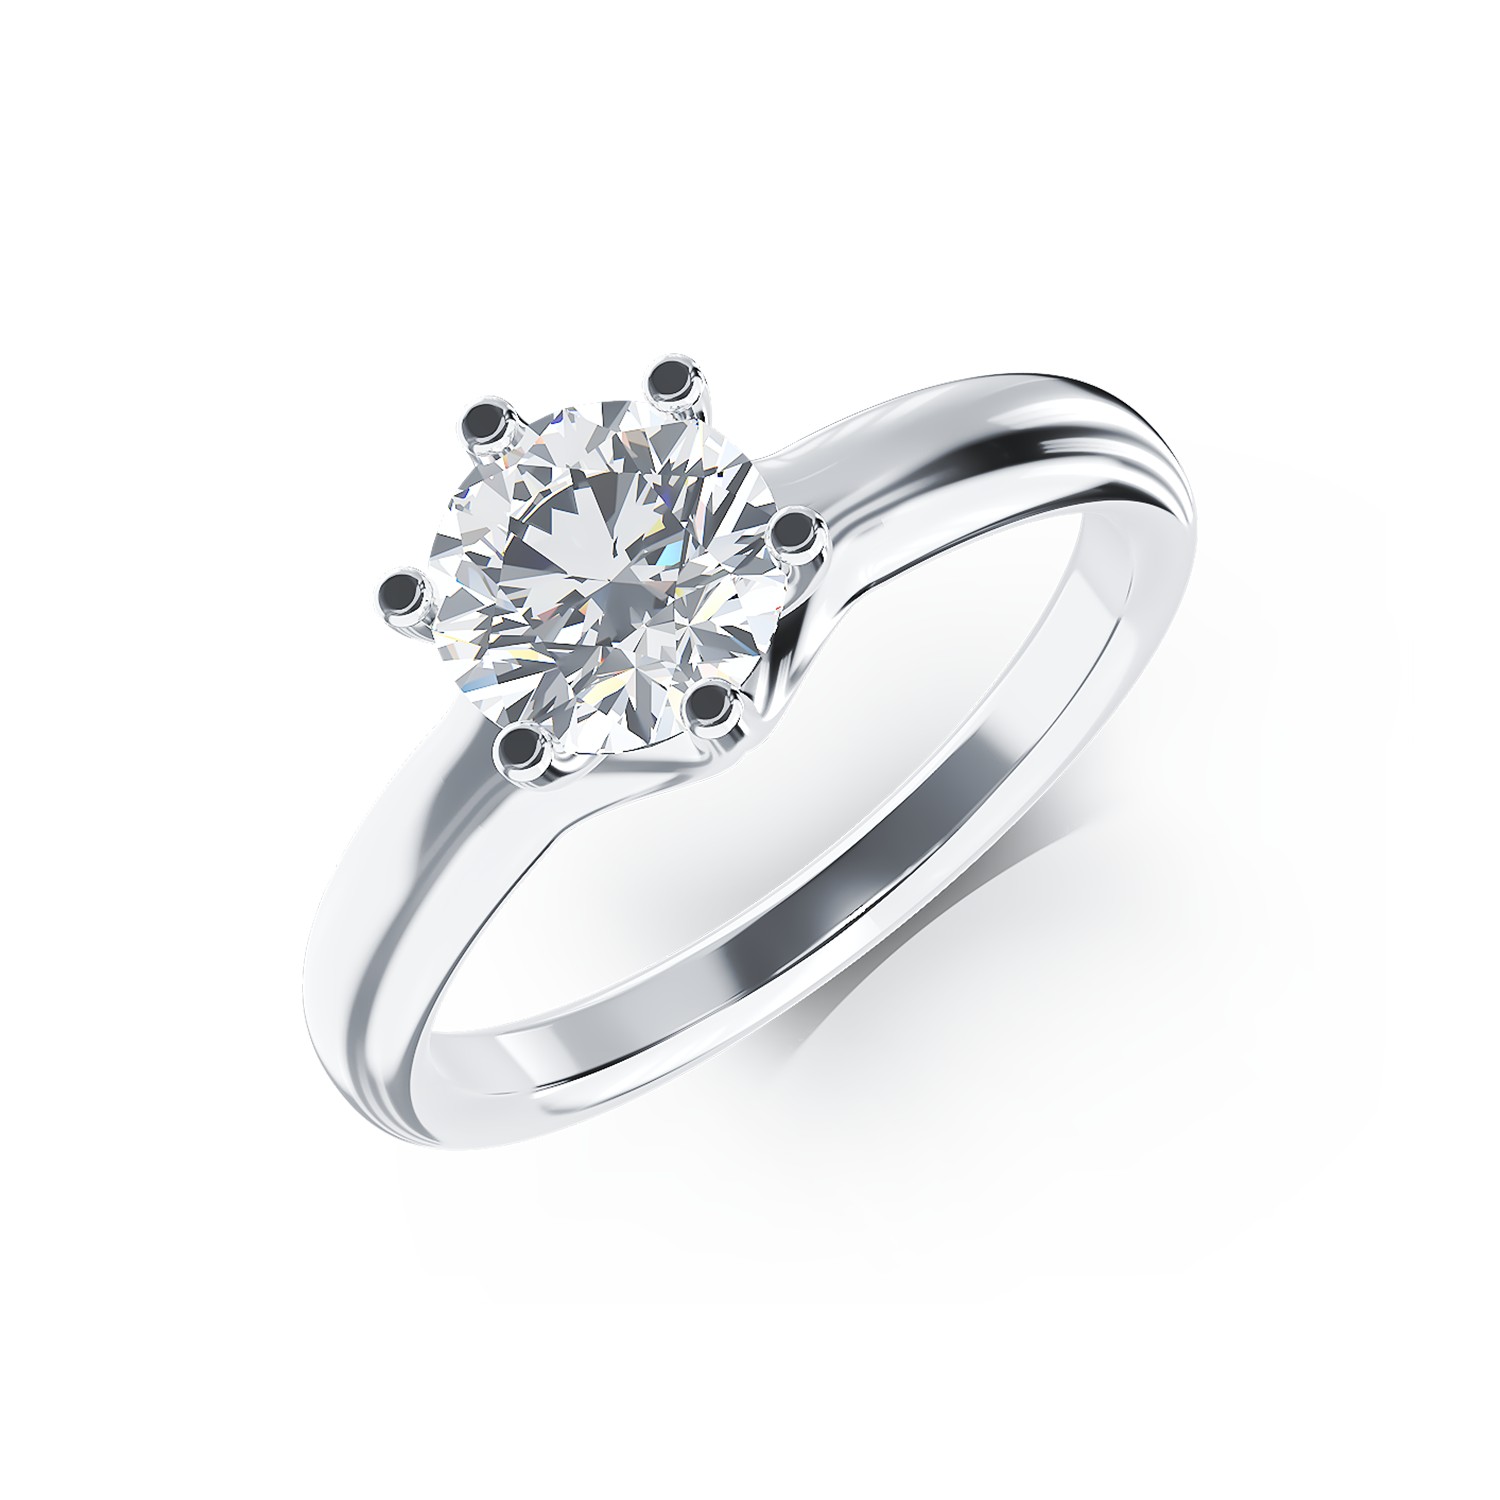 18K white gold engagement ring with a 1ct solitaire diamond